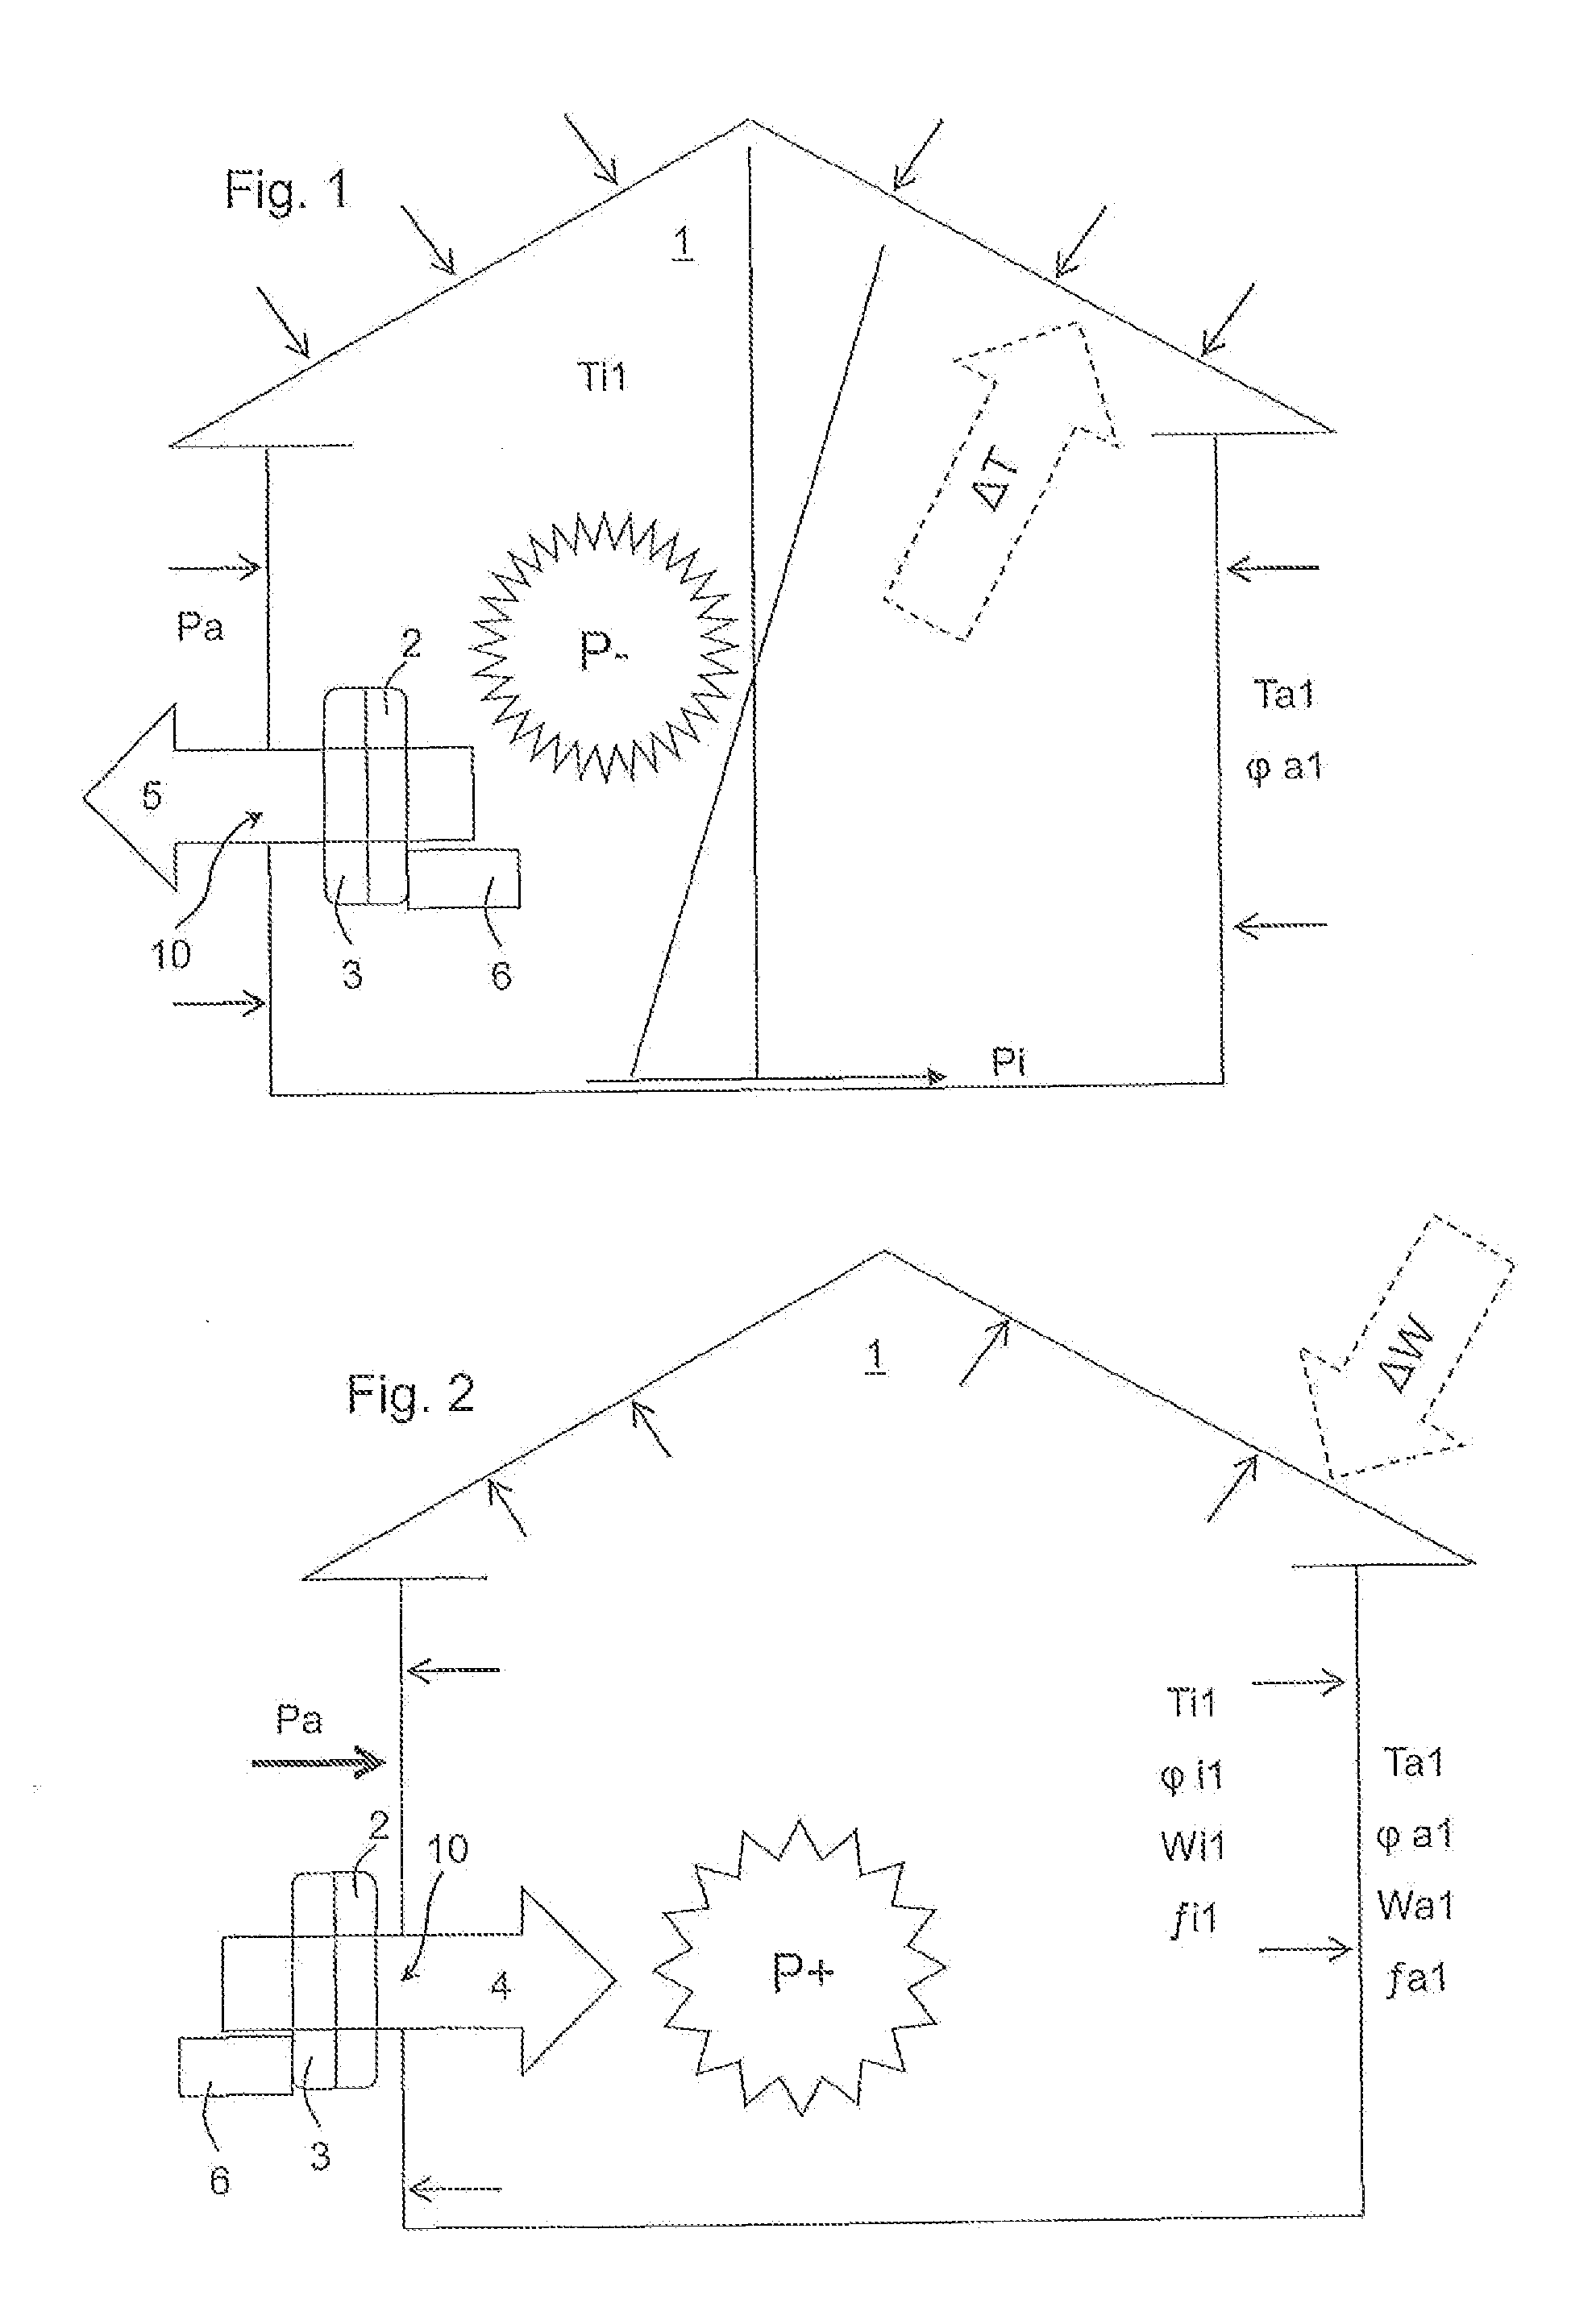 Method for climate control in buildings